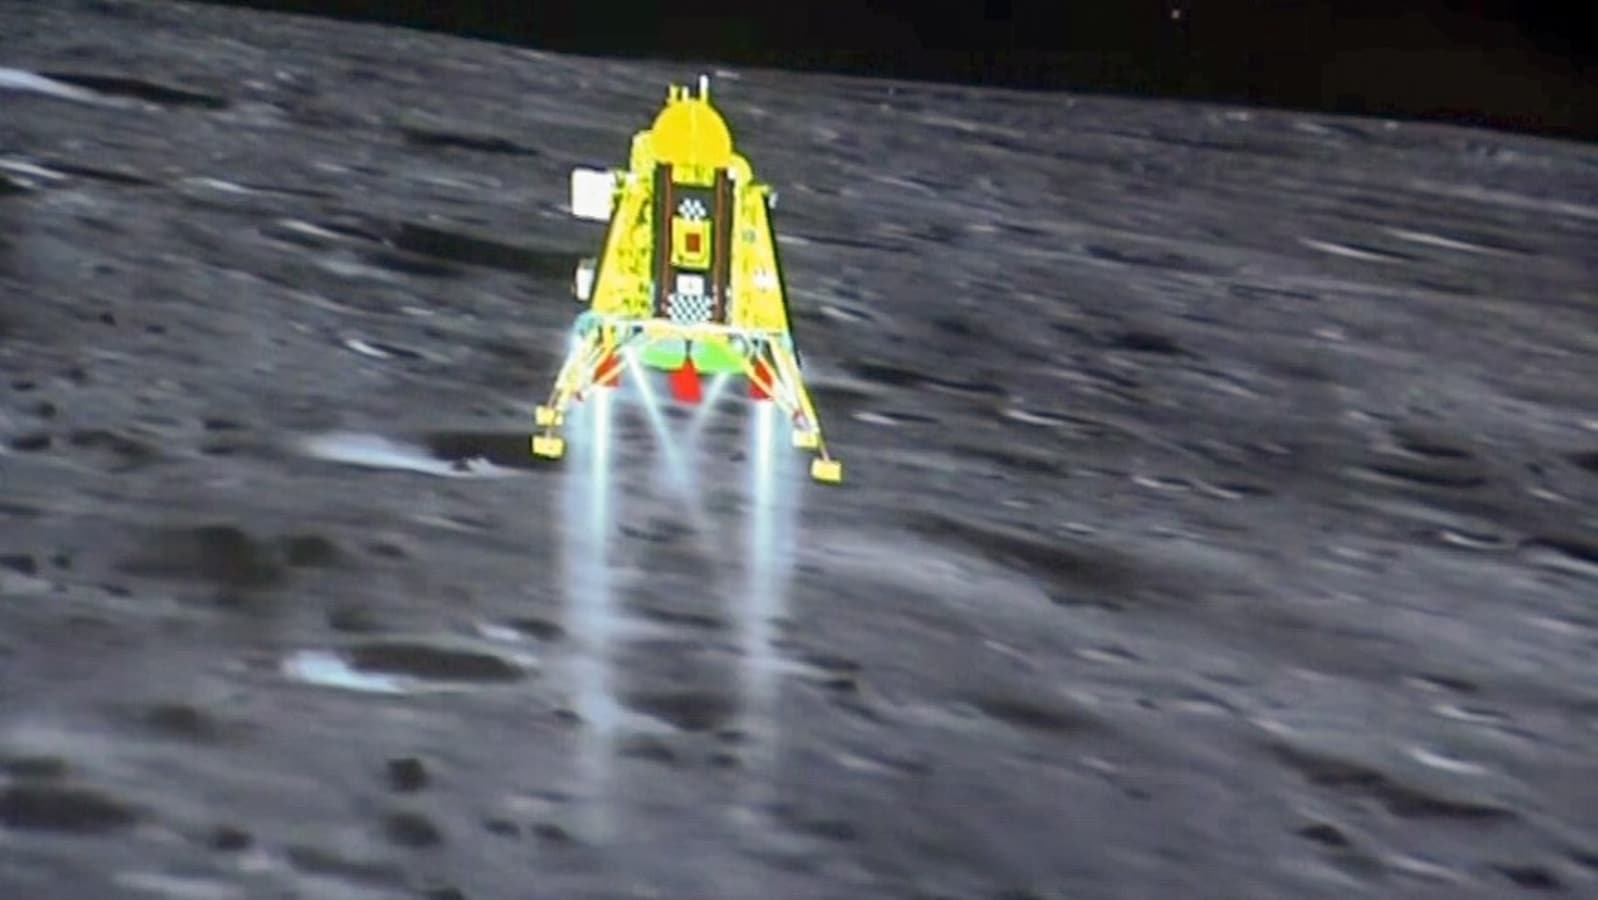 ‘India, I reached my destination’: Chandrayaan-3 says after moon landing – the tech that made it all possible